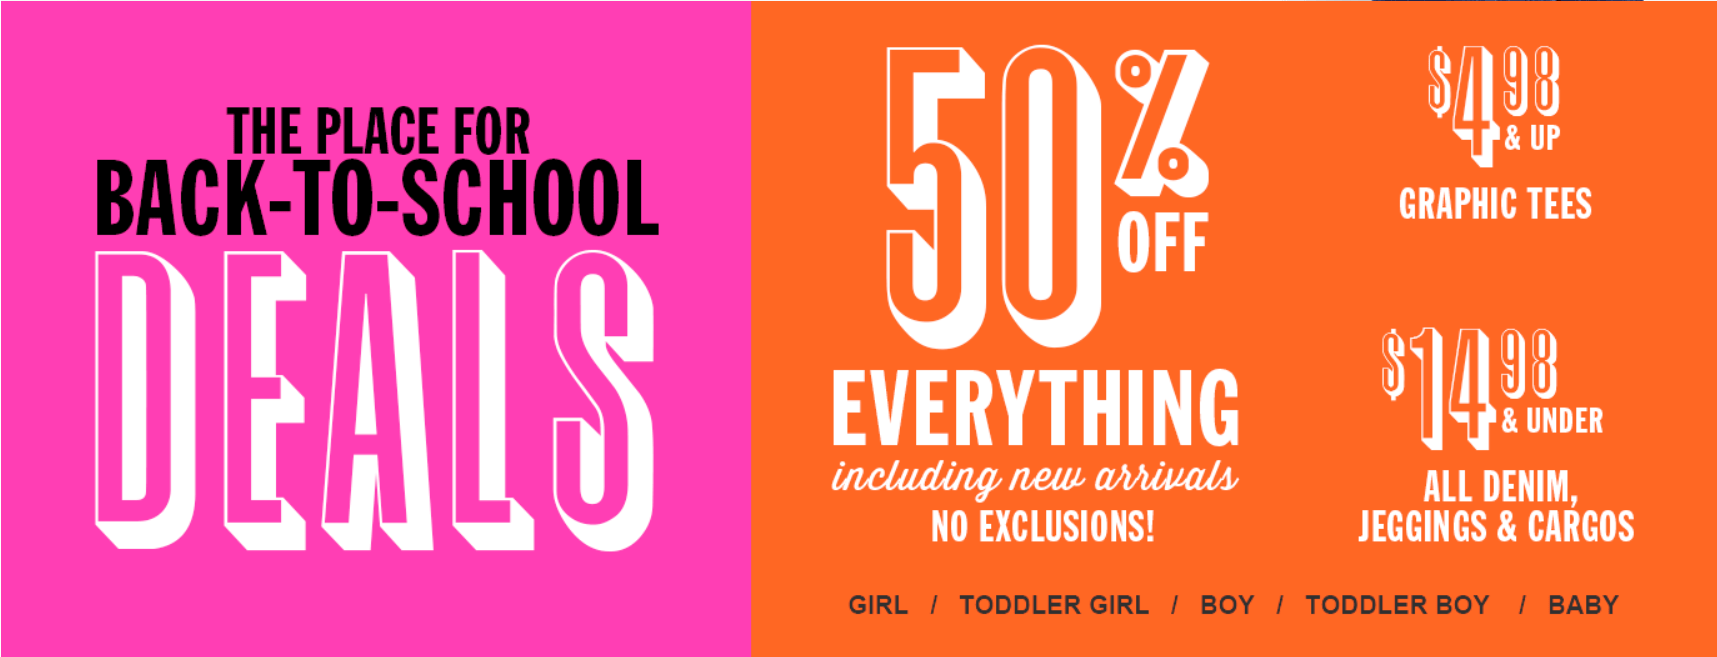 The Children’s Place Canada Back to School Deals Save 50 Off